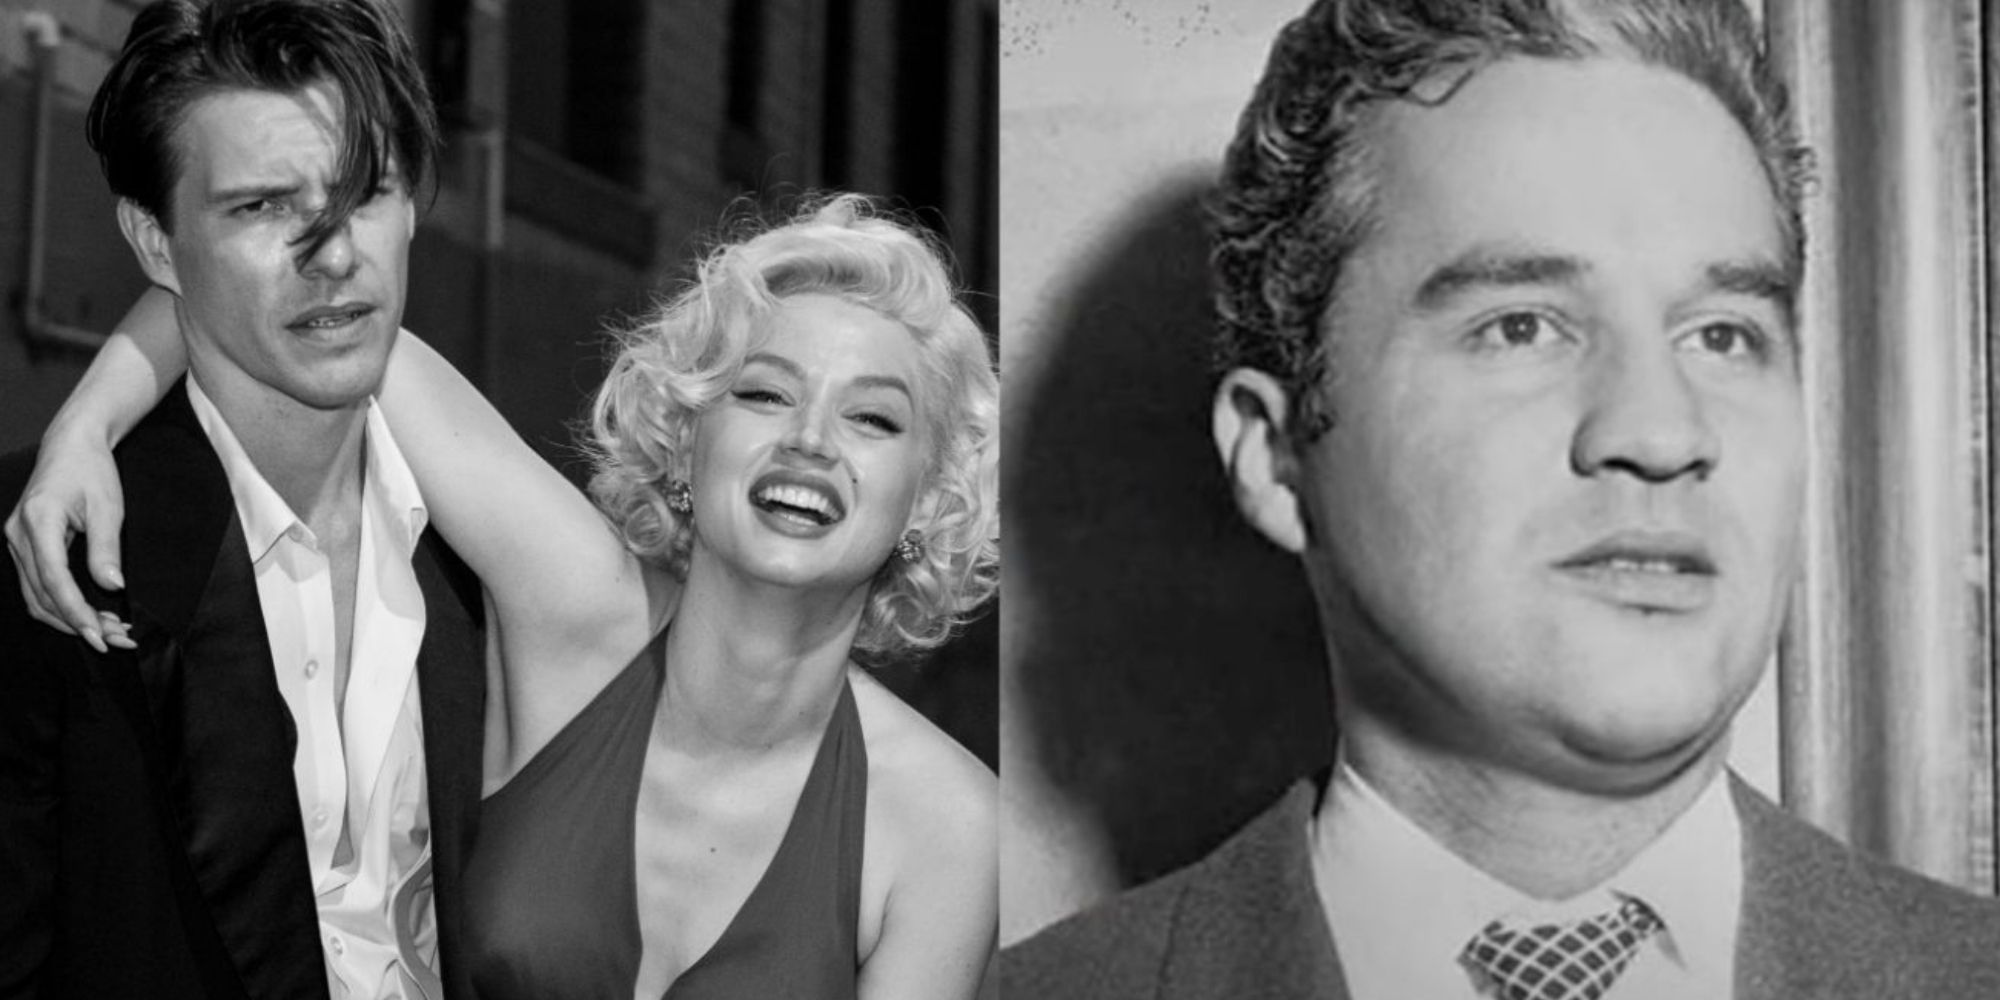 Did Marilyn Monroe have affairs with Chaplin Jr and Robinson Jr?